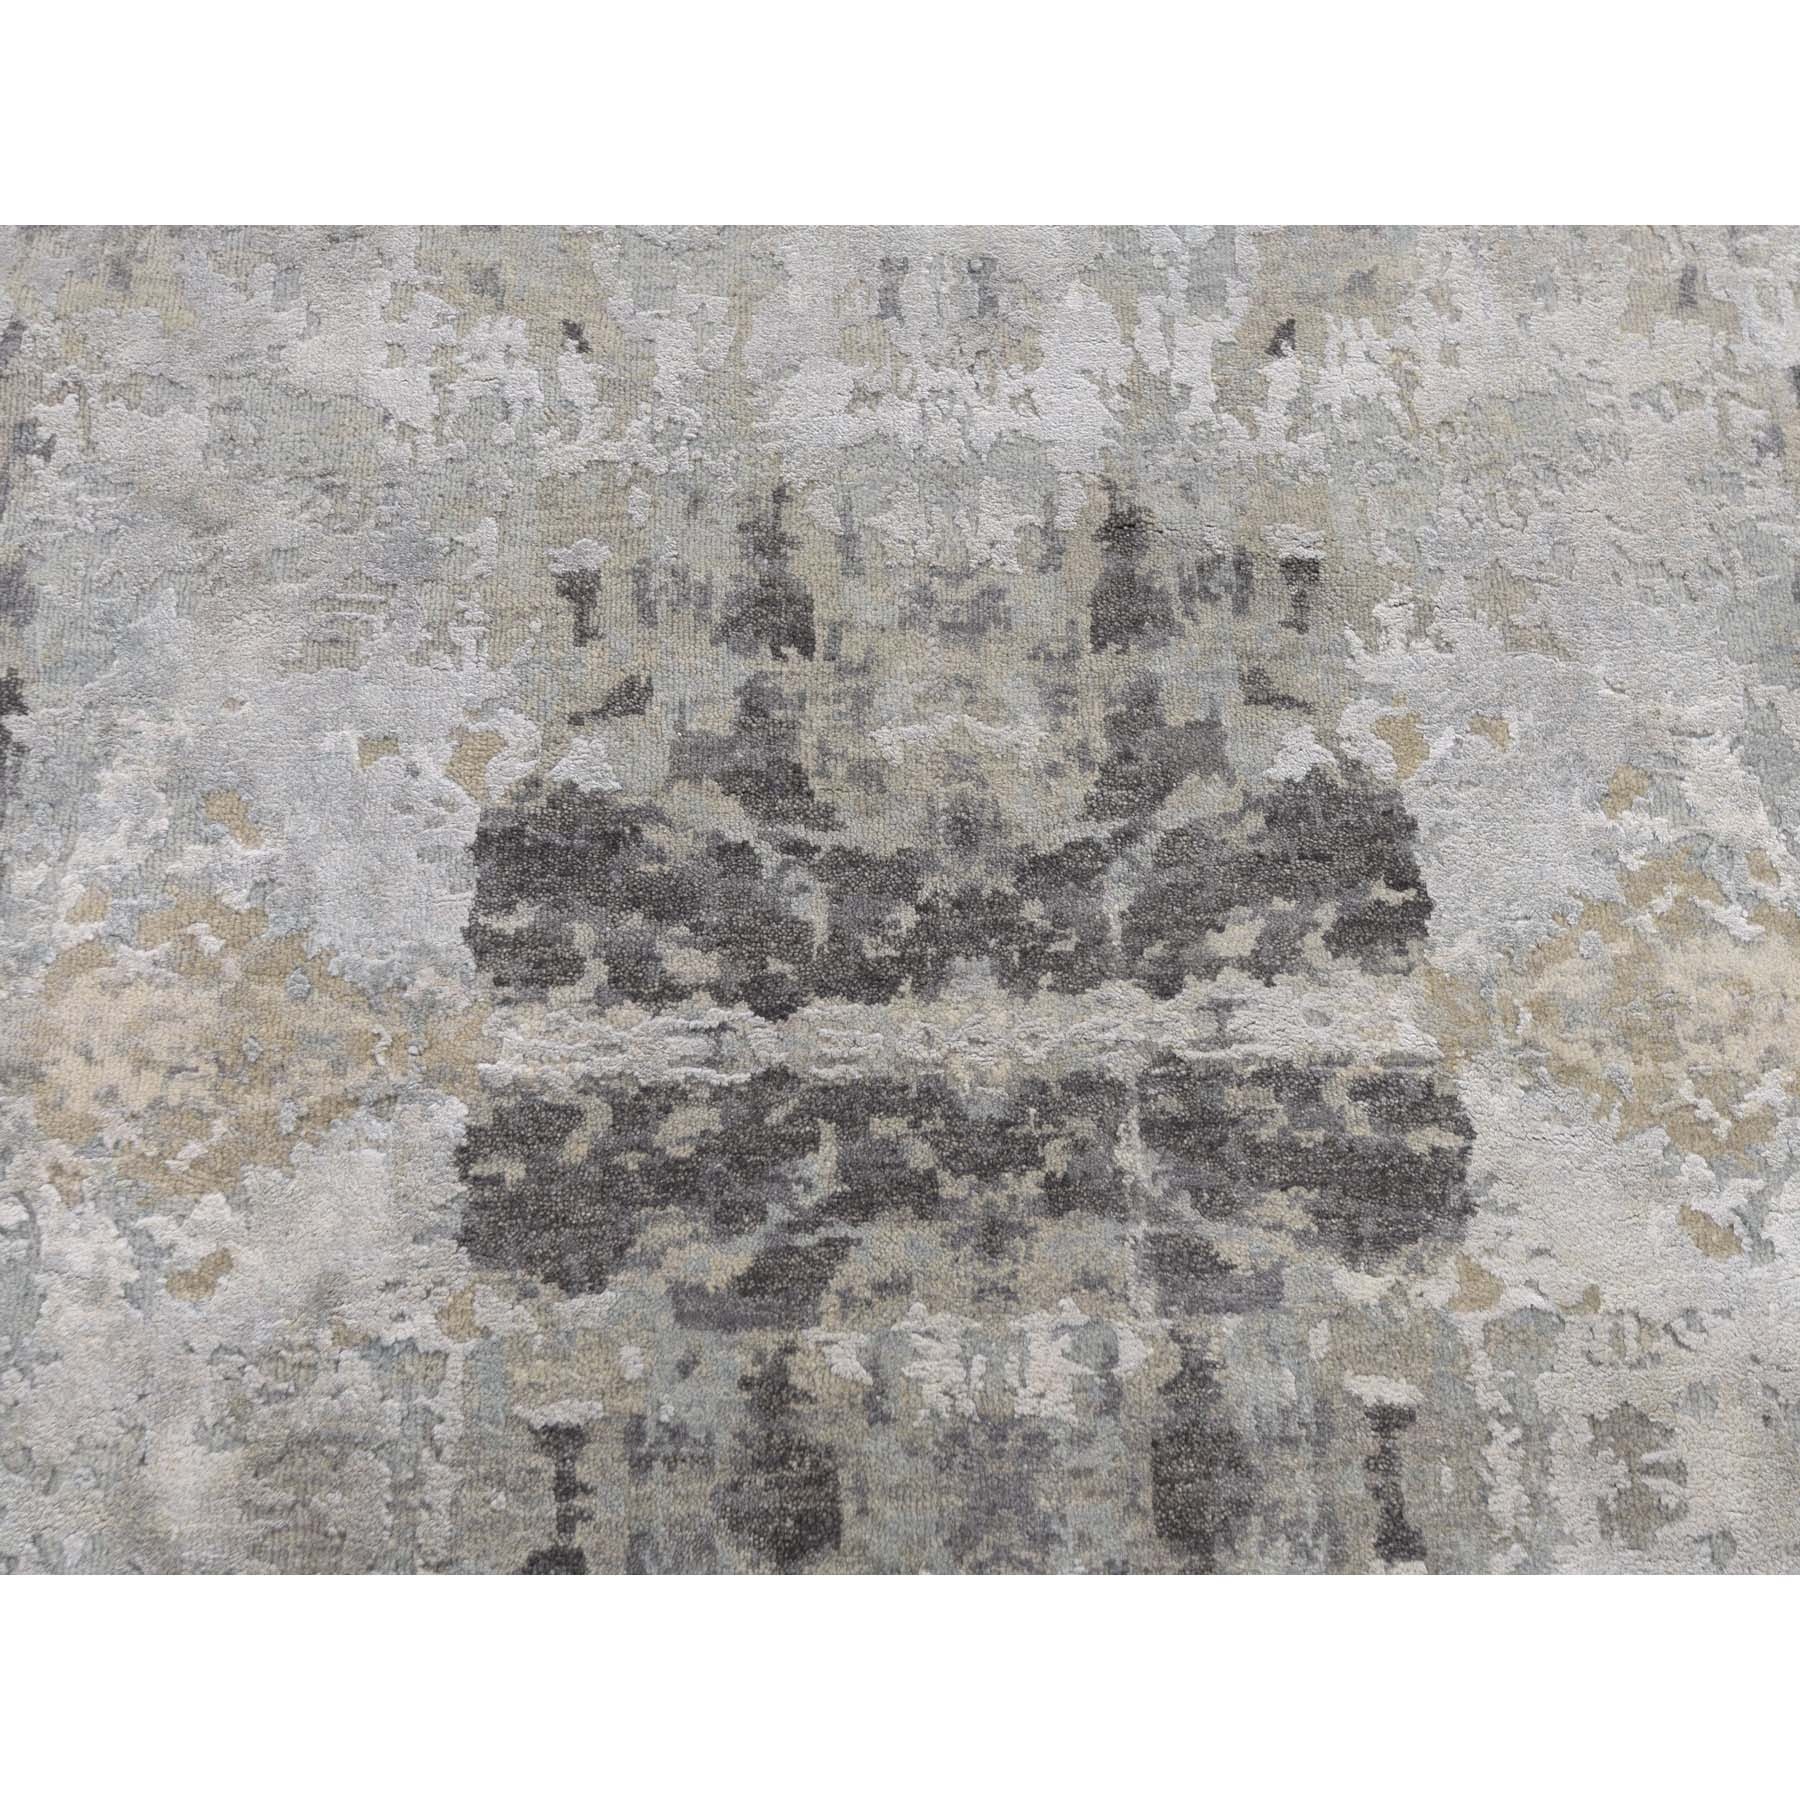 9'x11'9" Silver Abstract Design Hi-Lo Pile Wool And Silk Hand Woven Oriental Rug 